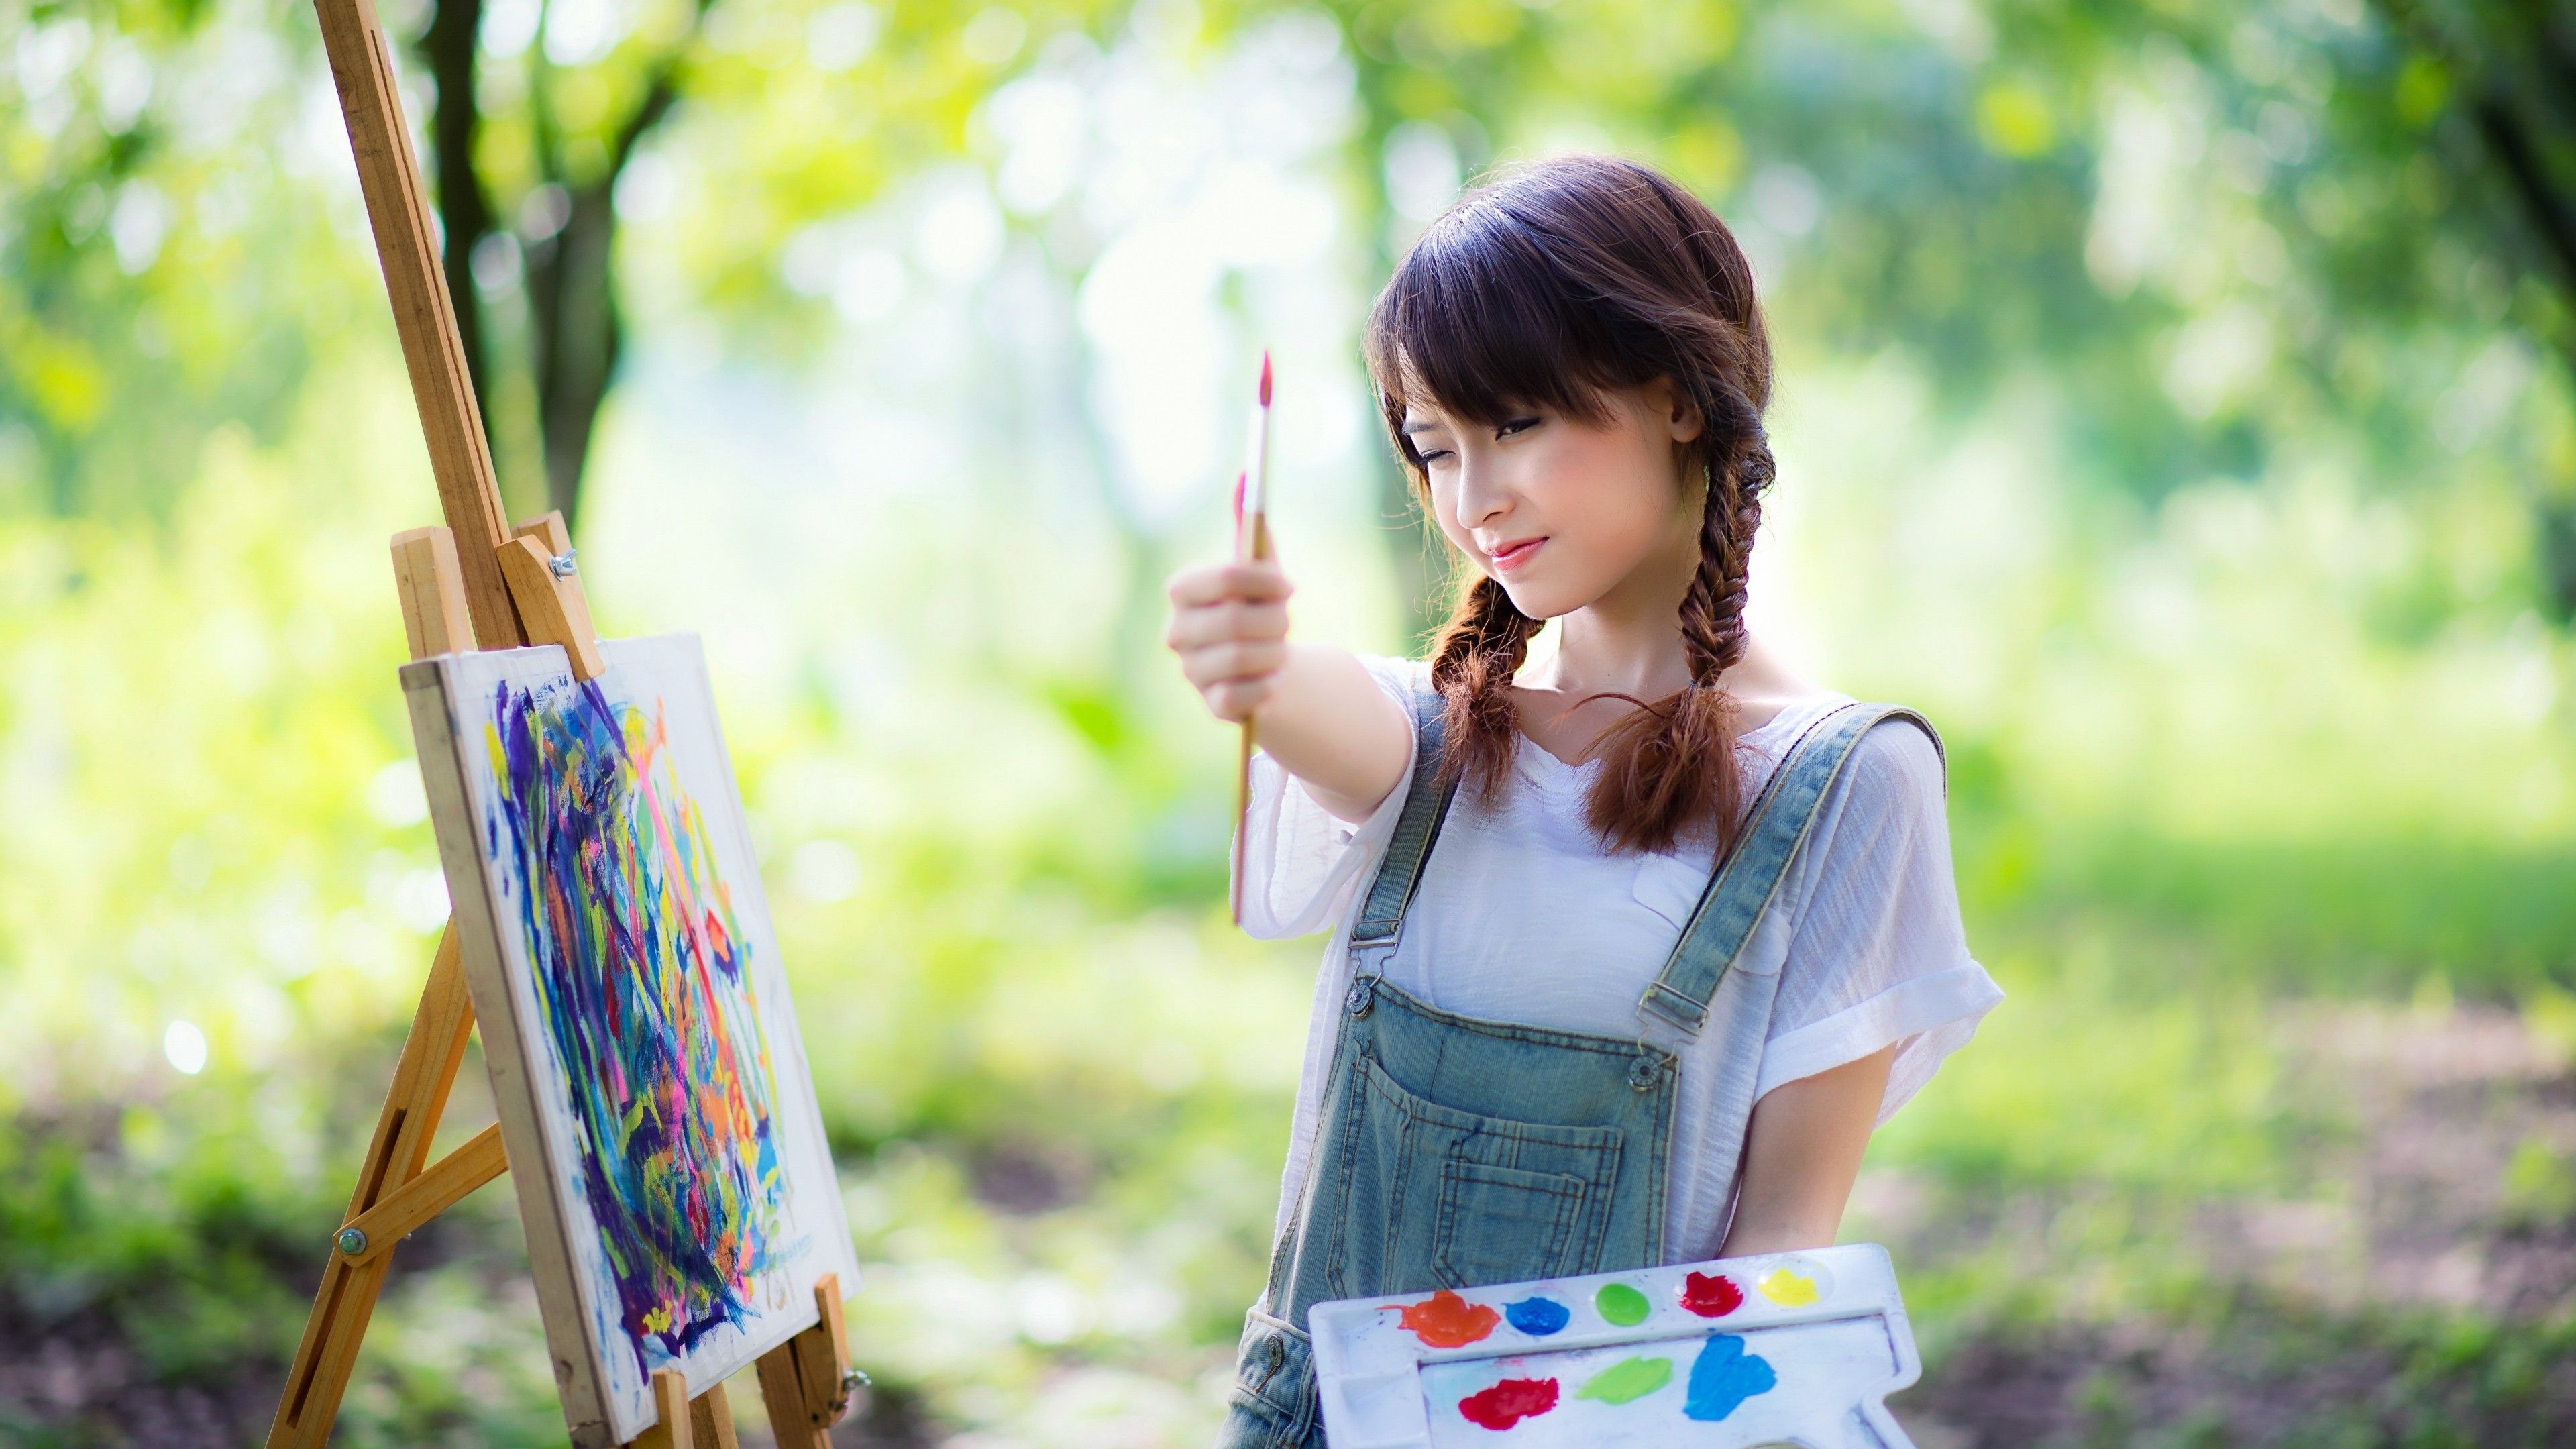 Wallpaper, sunlight, trees, painting, people, women outdoors, depth of field, T shirt, long hair, abstract, nature, brunette, grass, Asian, dress, jeans, green, paintbrushes, picnic, spring, Person, play, painters, thumbs up, easel